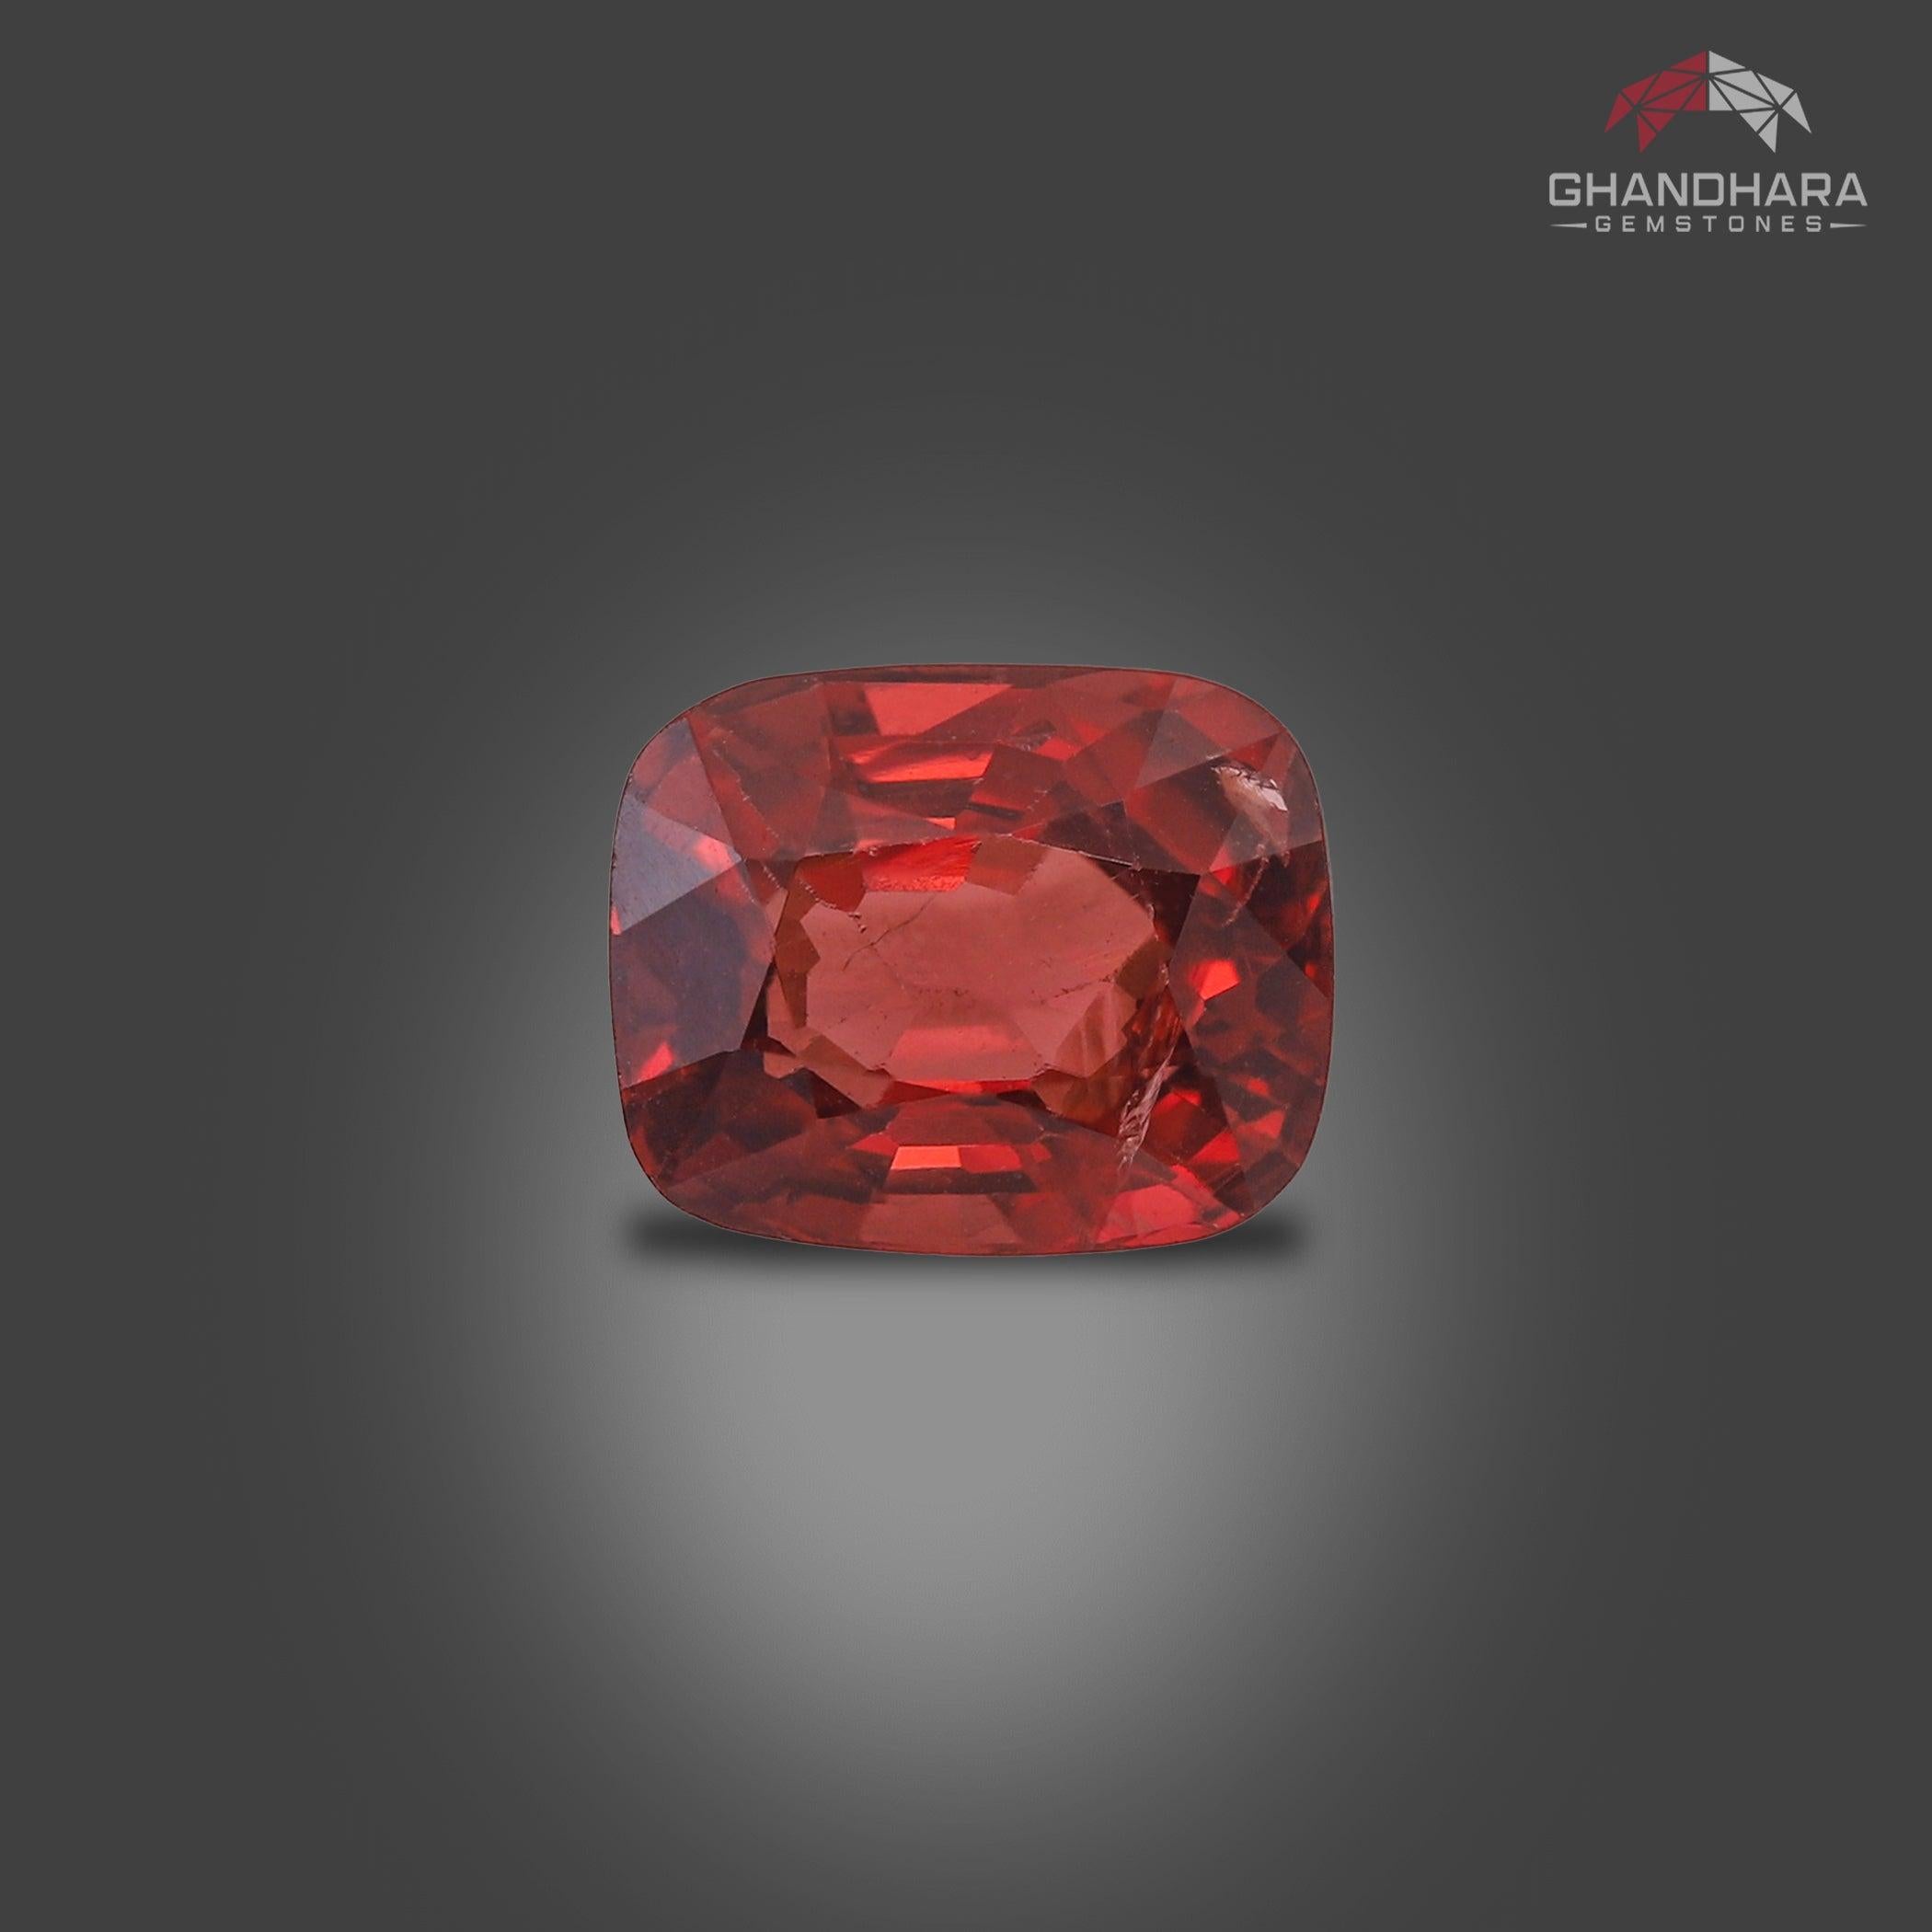 Orange Color Natural Spinel From Burma of 1.05 Carats from Burma has a wonderful cut in a Cushion shape, incredible Orange Color. Great brilliance. This gem is SI Clarity.

Product Information:
GEMSTONE TYPE:	Orange Color Natural Spinel From